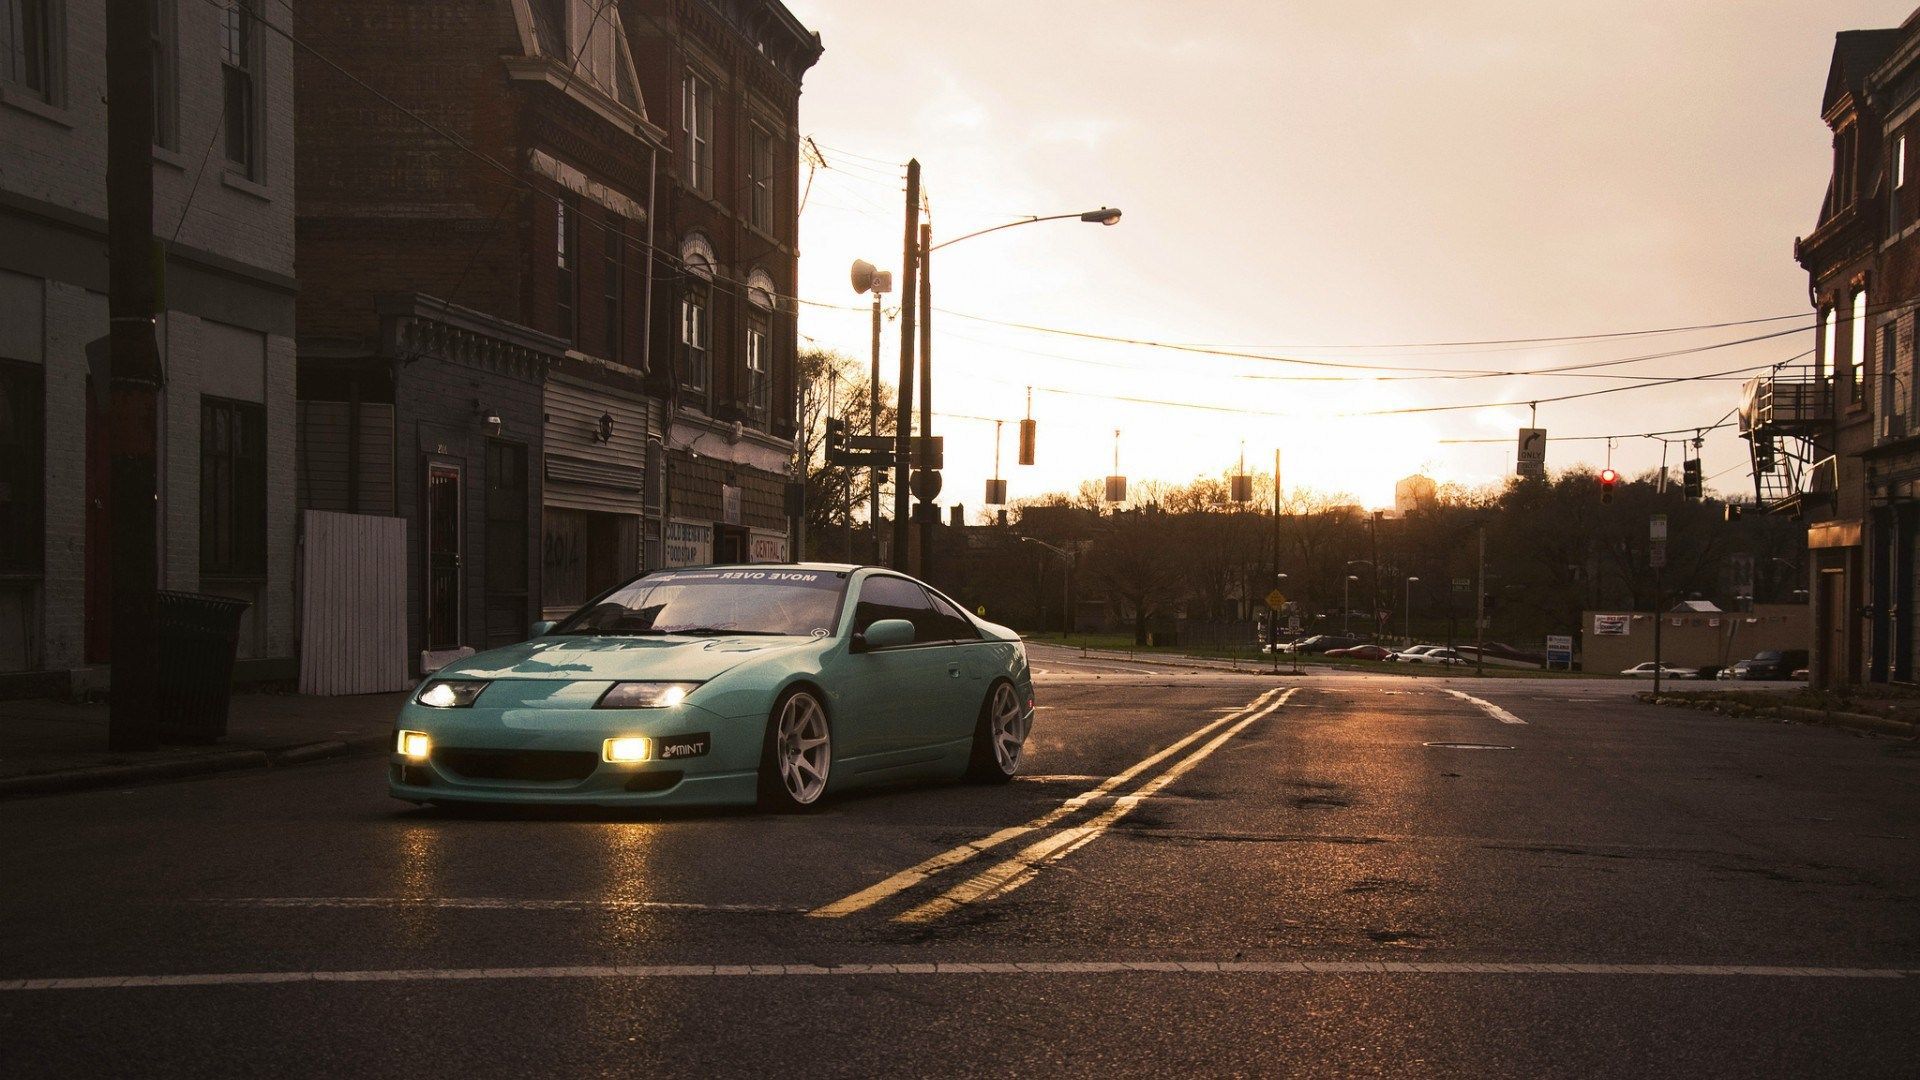 Nissan 300zx Wallpaper Image Photos Pictures Background